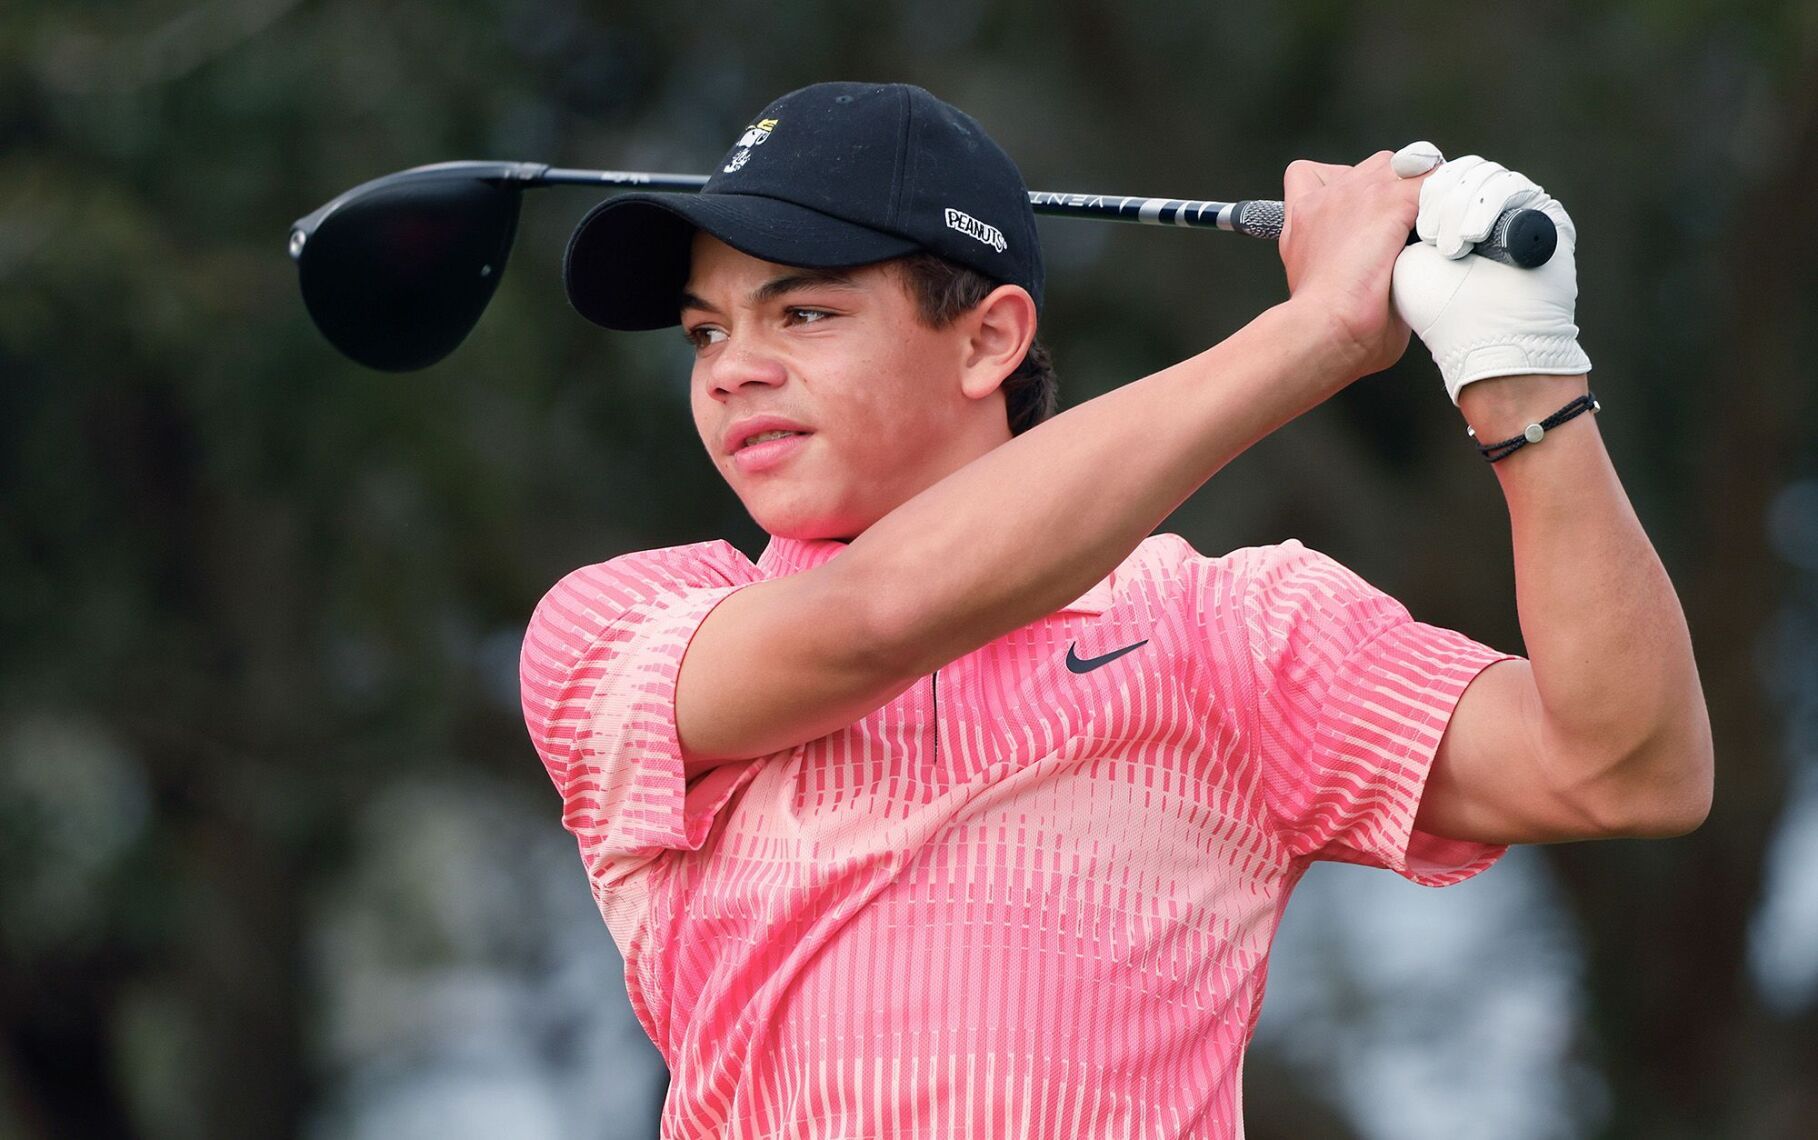 Charlie Woods shoots career-best round to win junior golf tournament  abc12